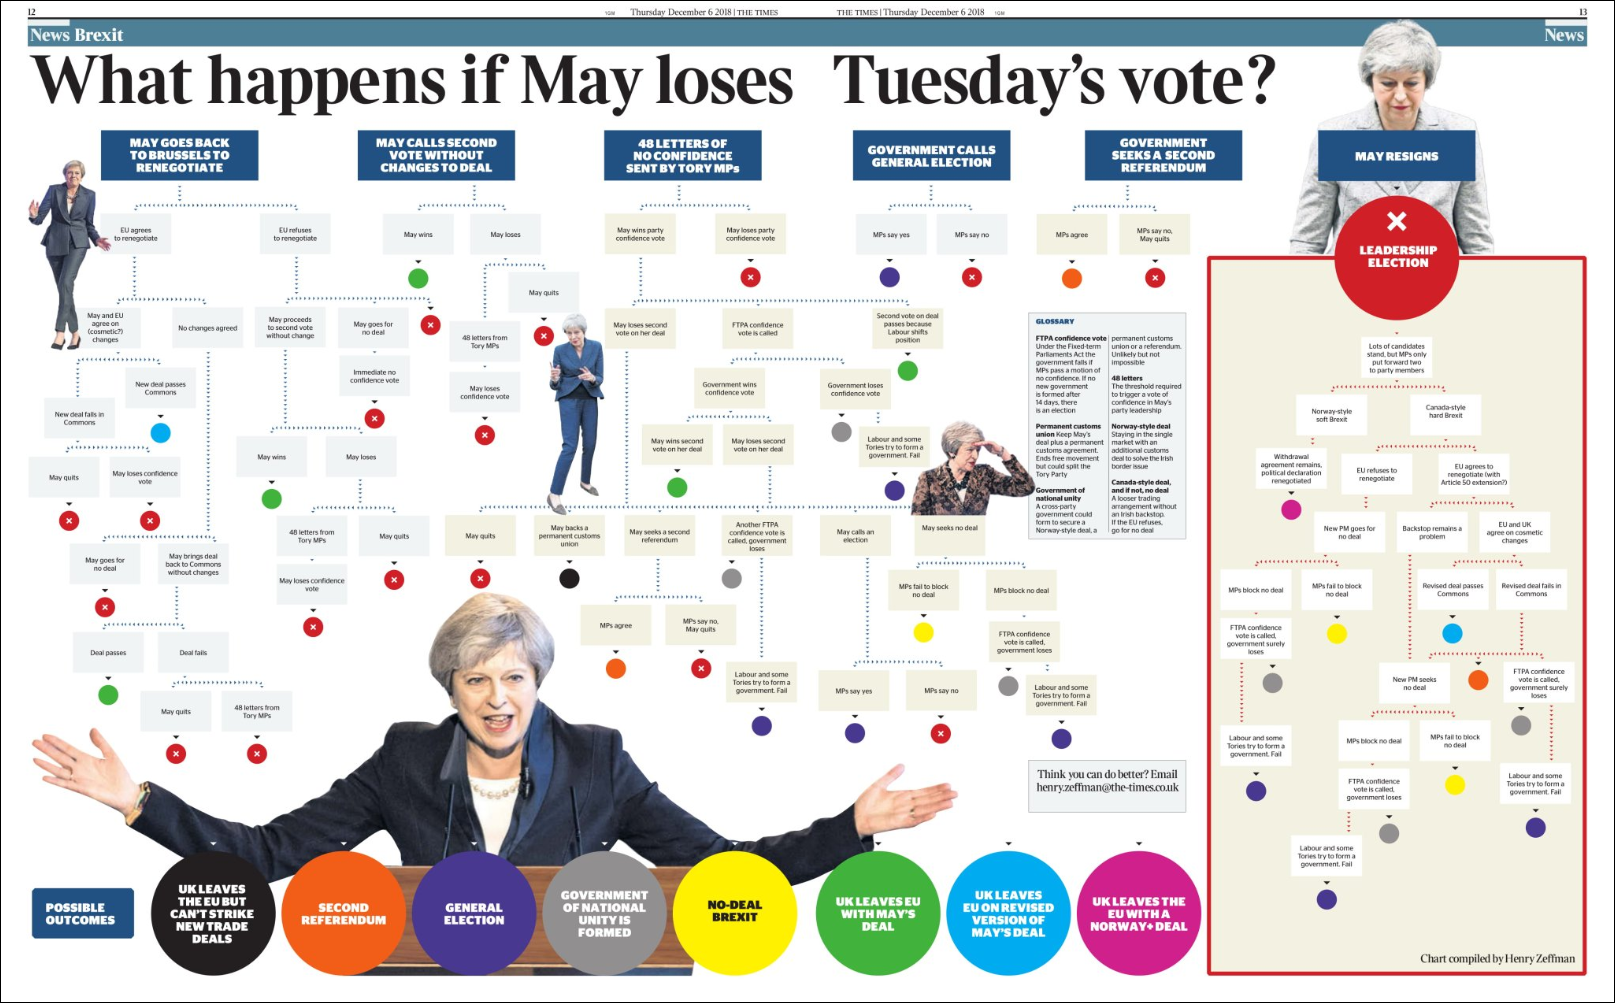 What happens if Theresa May loses the meaningful vote in parliament next week?1615 x 1003